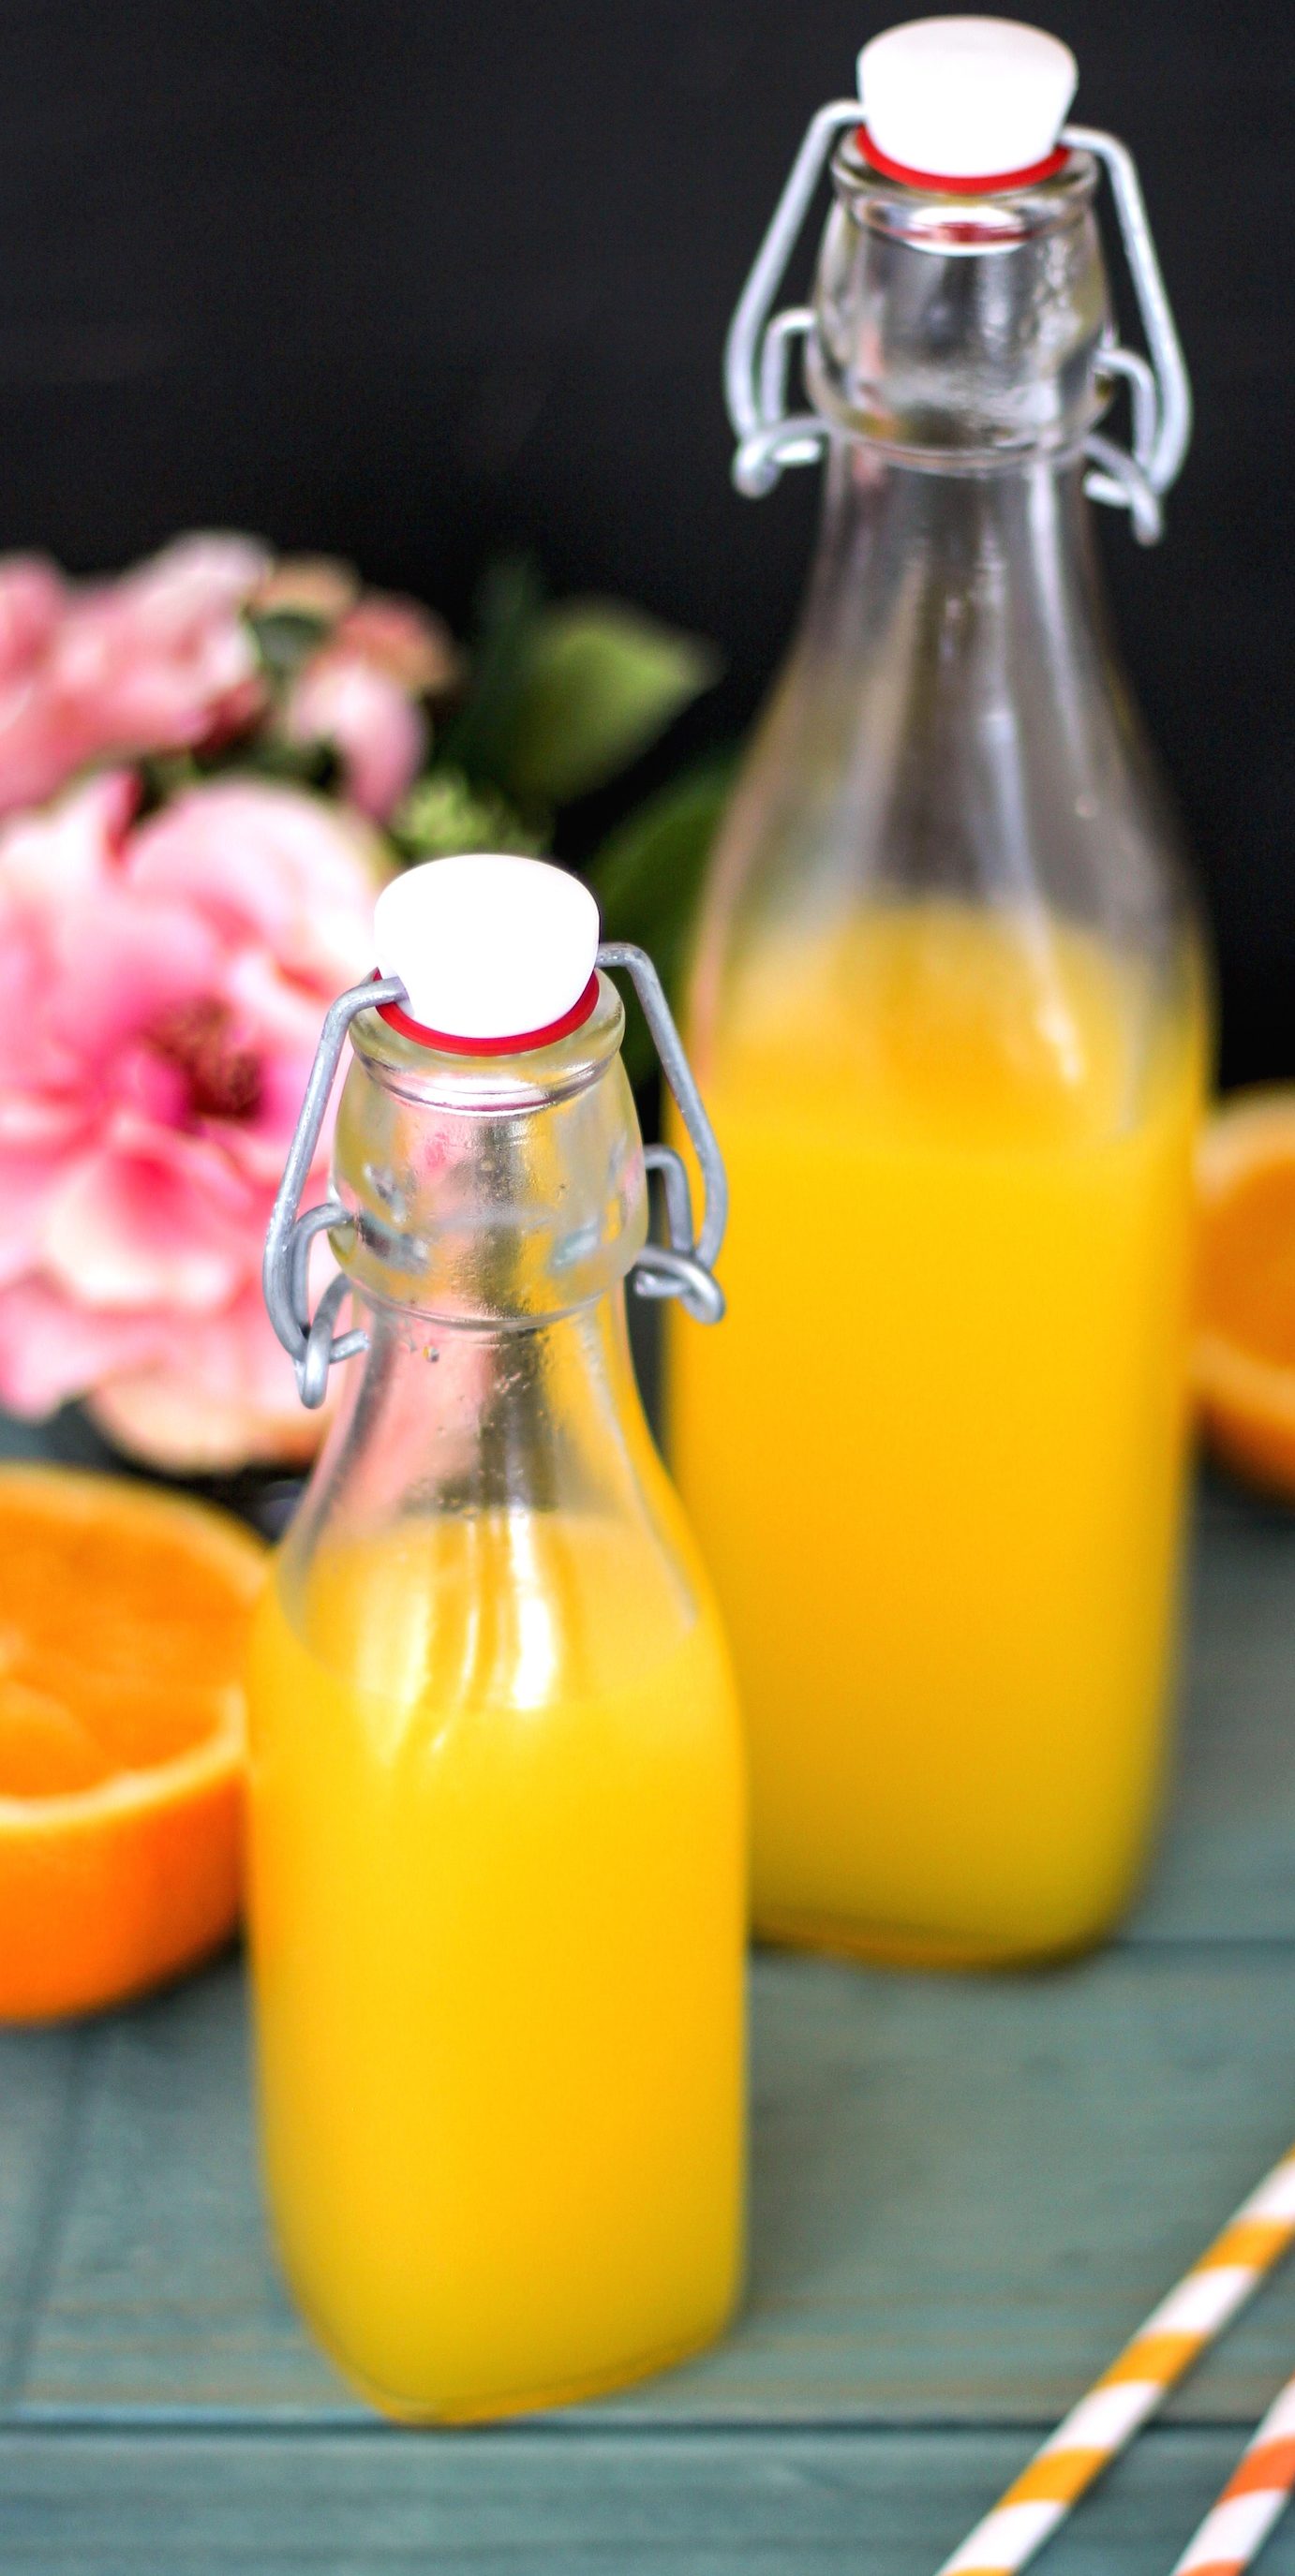 Healthy Homemade Sugar Free Orange Syrup recipe (refined sugar free, low carb, low calorie with only 2 calories per tablespoon!) - Healthy Dessert Recipes at Desserts with Benefits